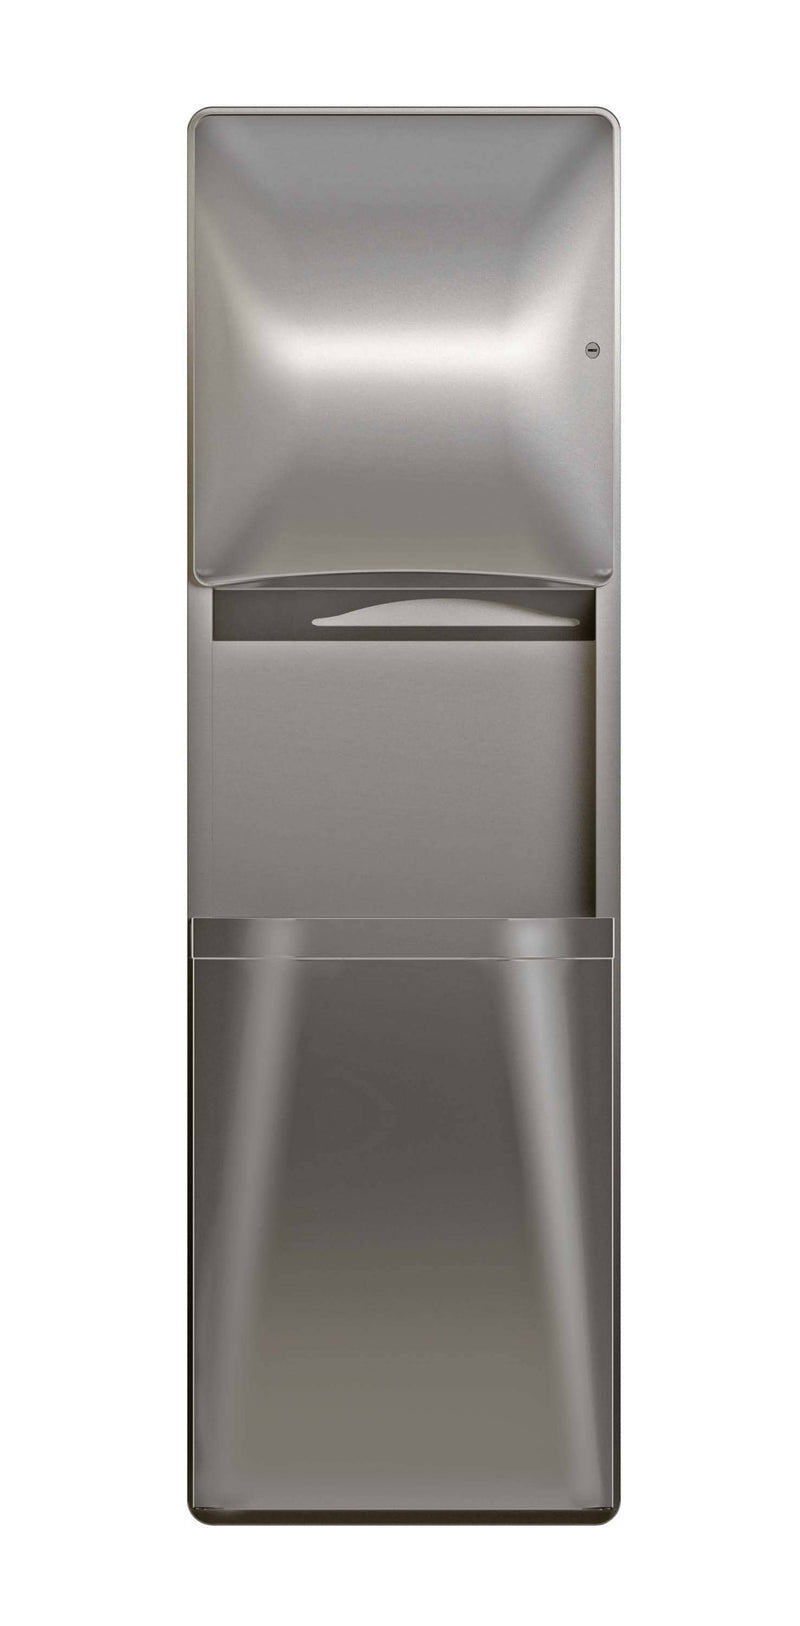 Bradley 2A05-36 Combination Toilet Paper Dispenser/Waste Receptacle, Recessed-Mounted, Stainless Steel - TotalRestroom.com